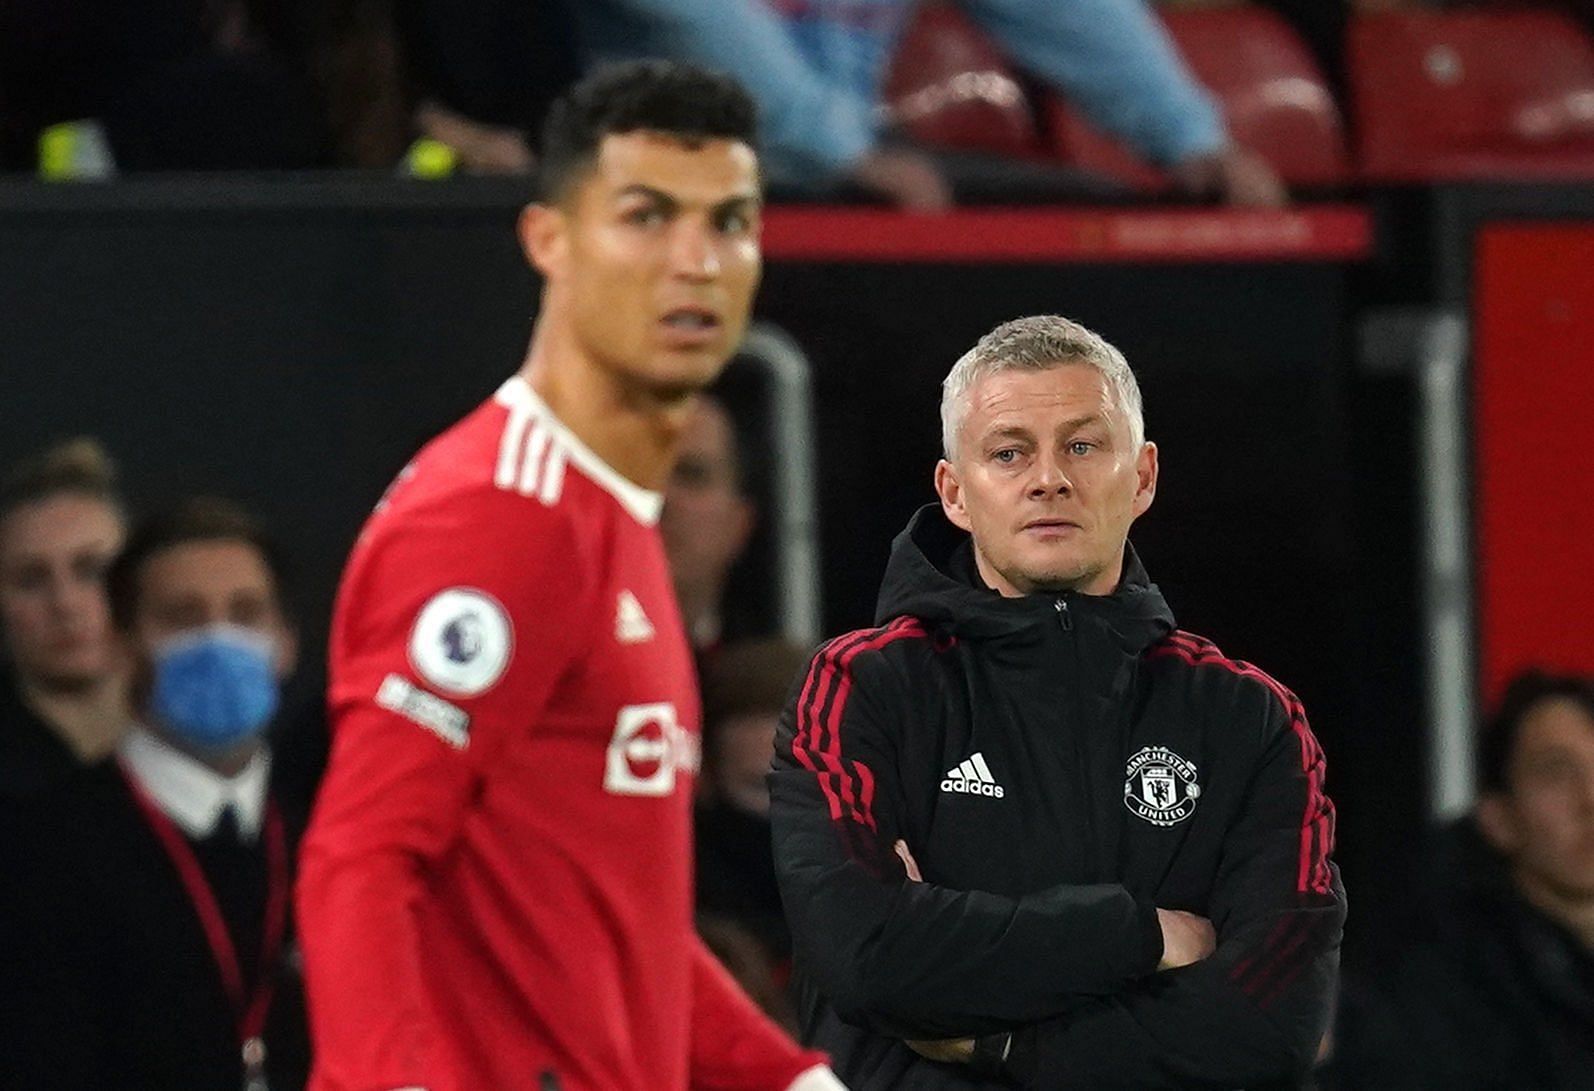 Manchester United are at their lowest point under Ole Gunnar Solskjaer.